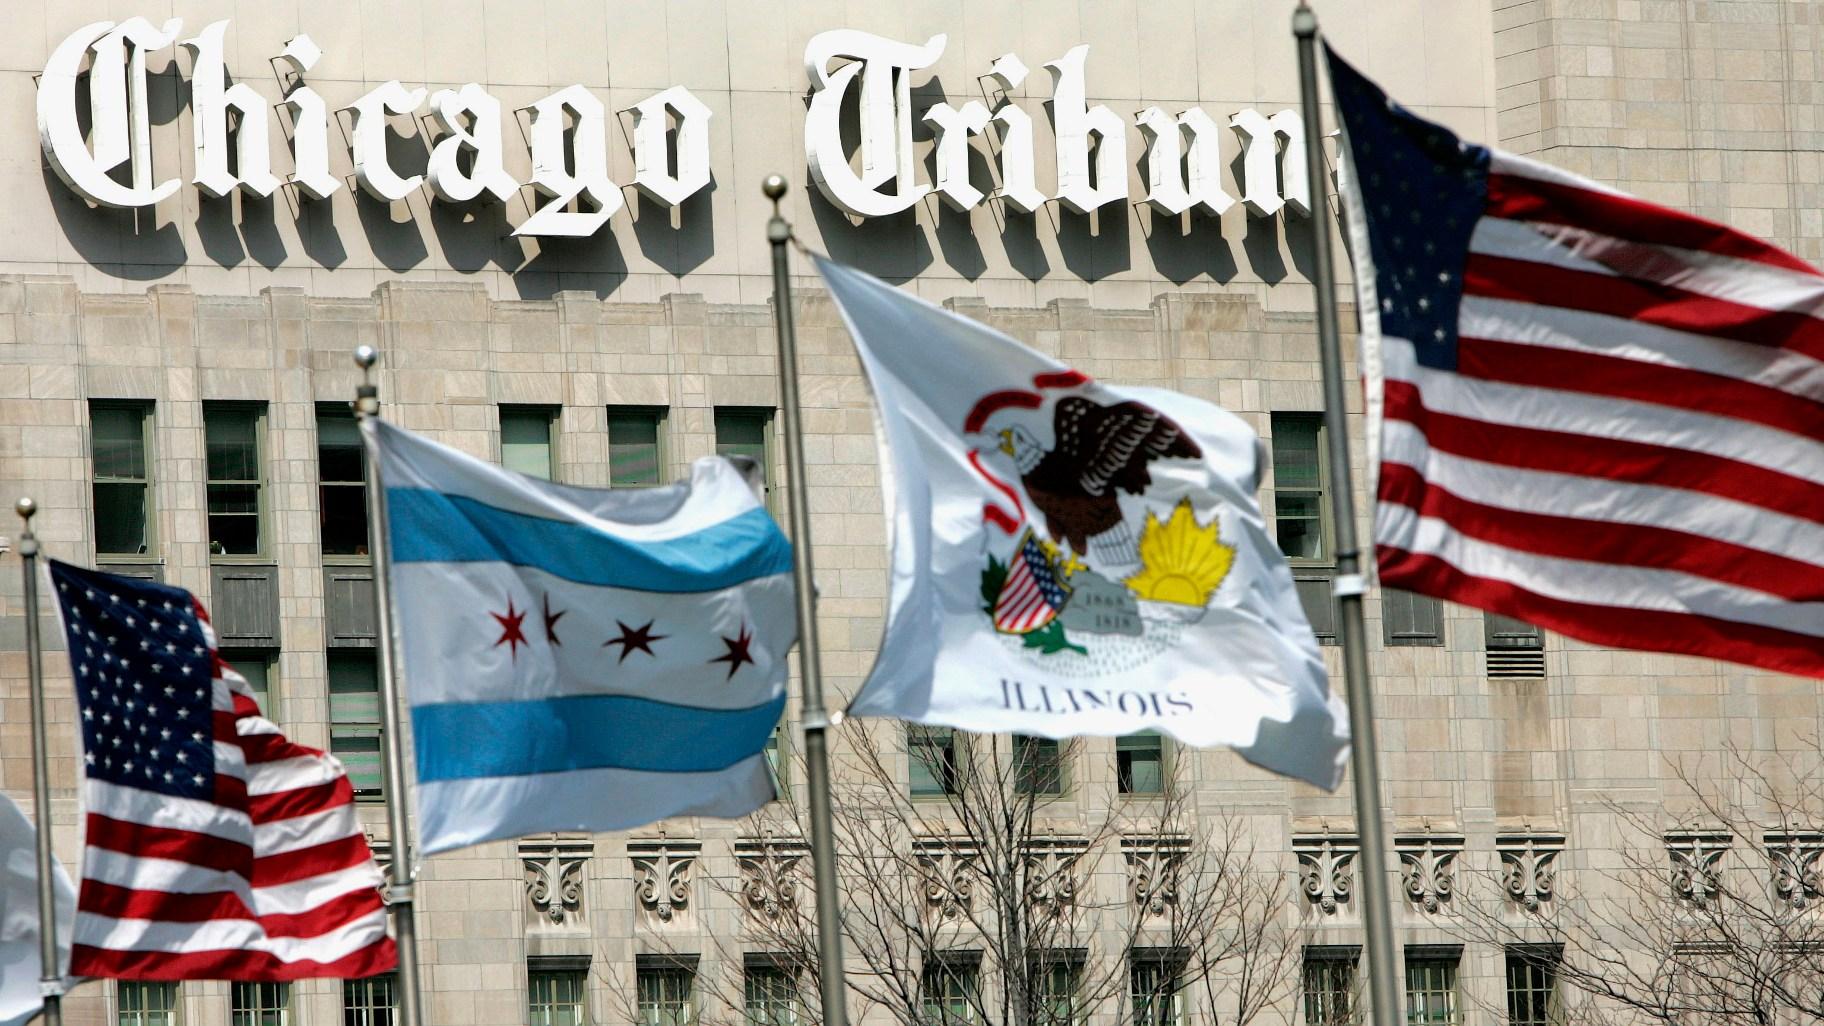 In this April 12, 2006, file photo, flags wave near the Chicago Tribune Tower in downtown Chicago. (AP Photo / Charles Rex Arbogast, File)